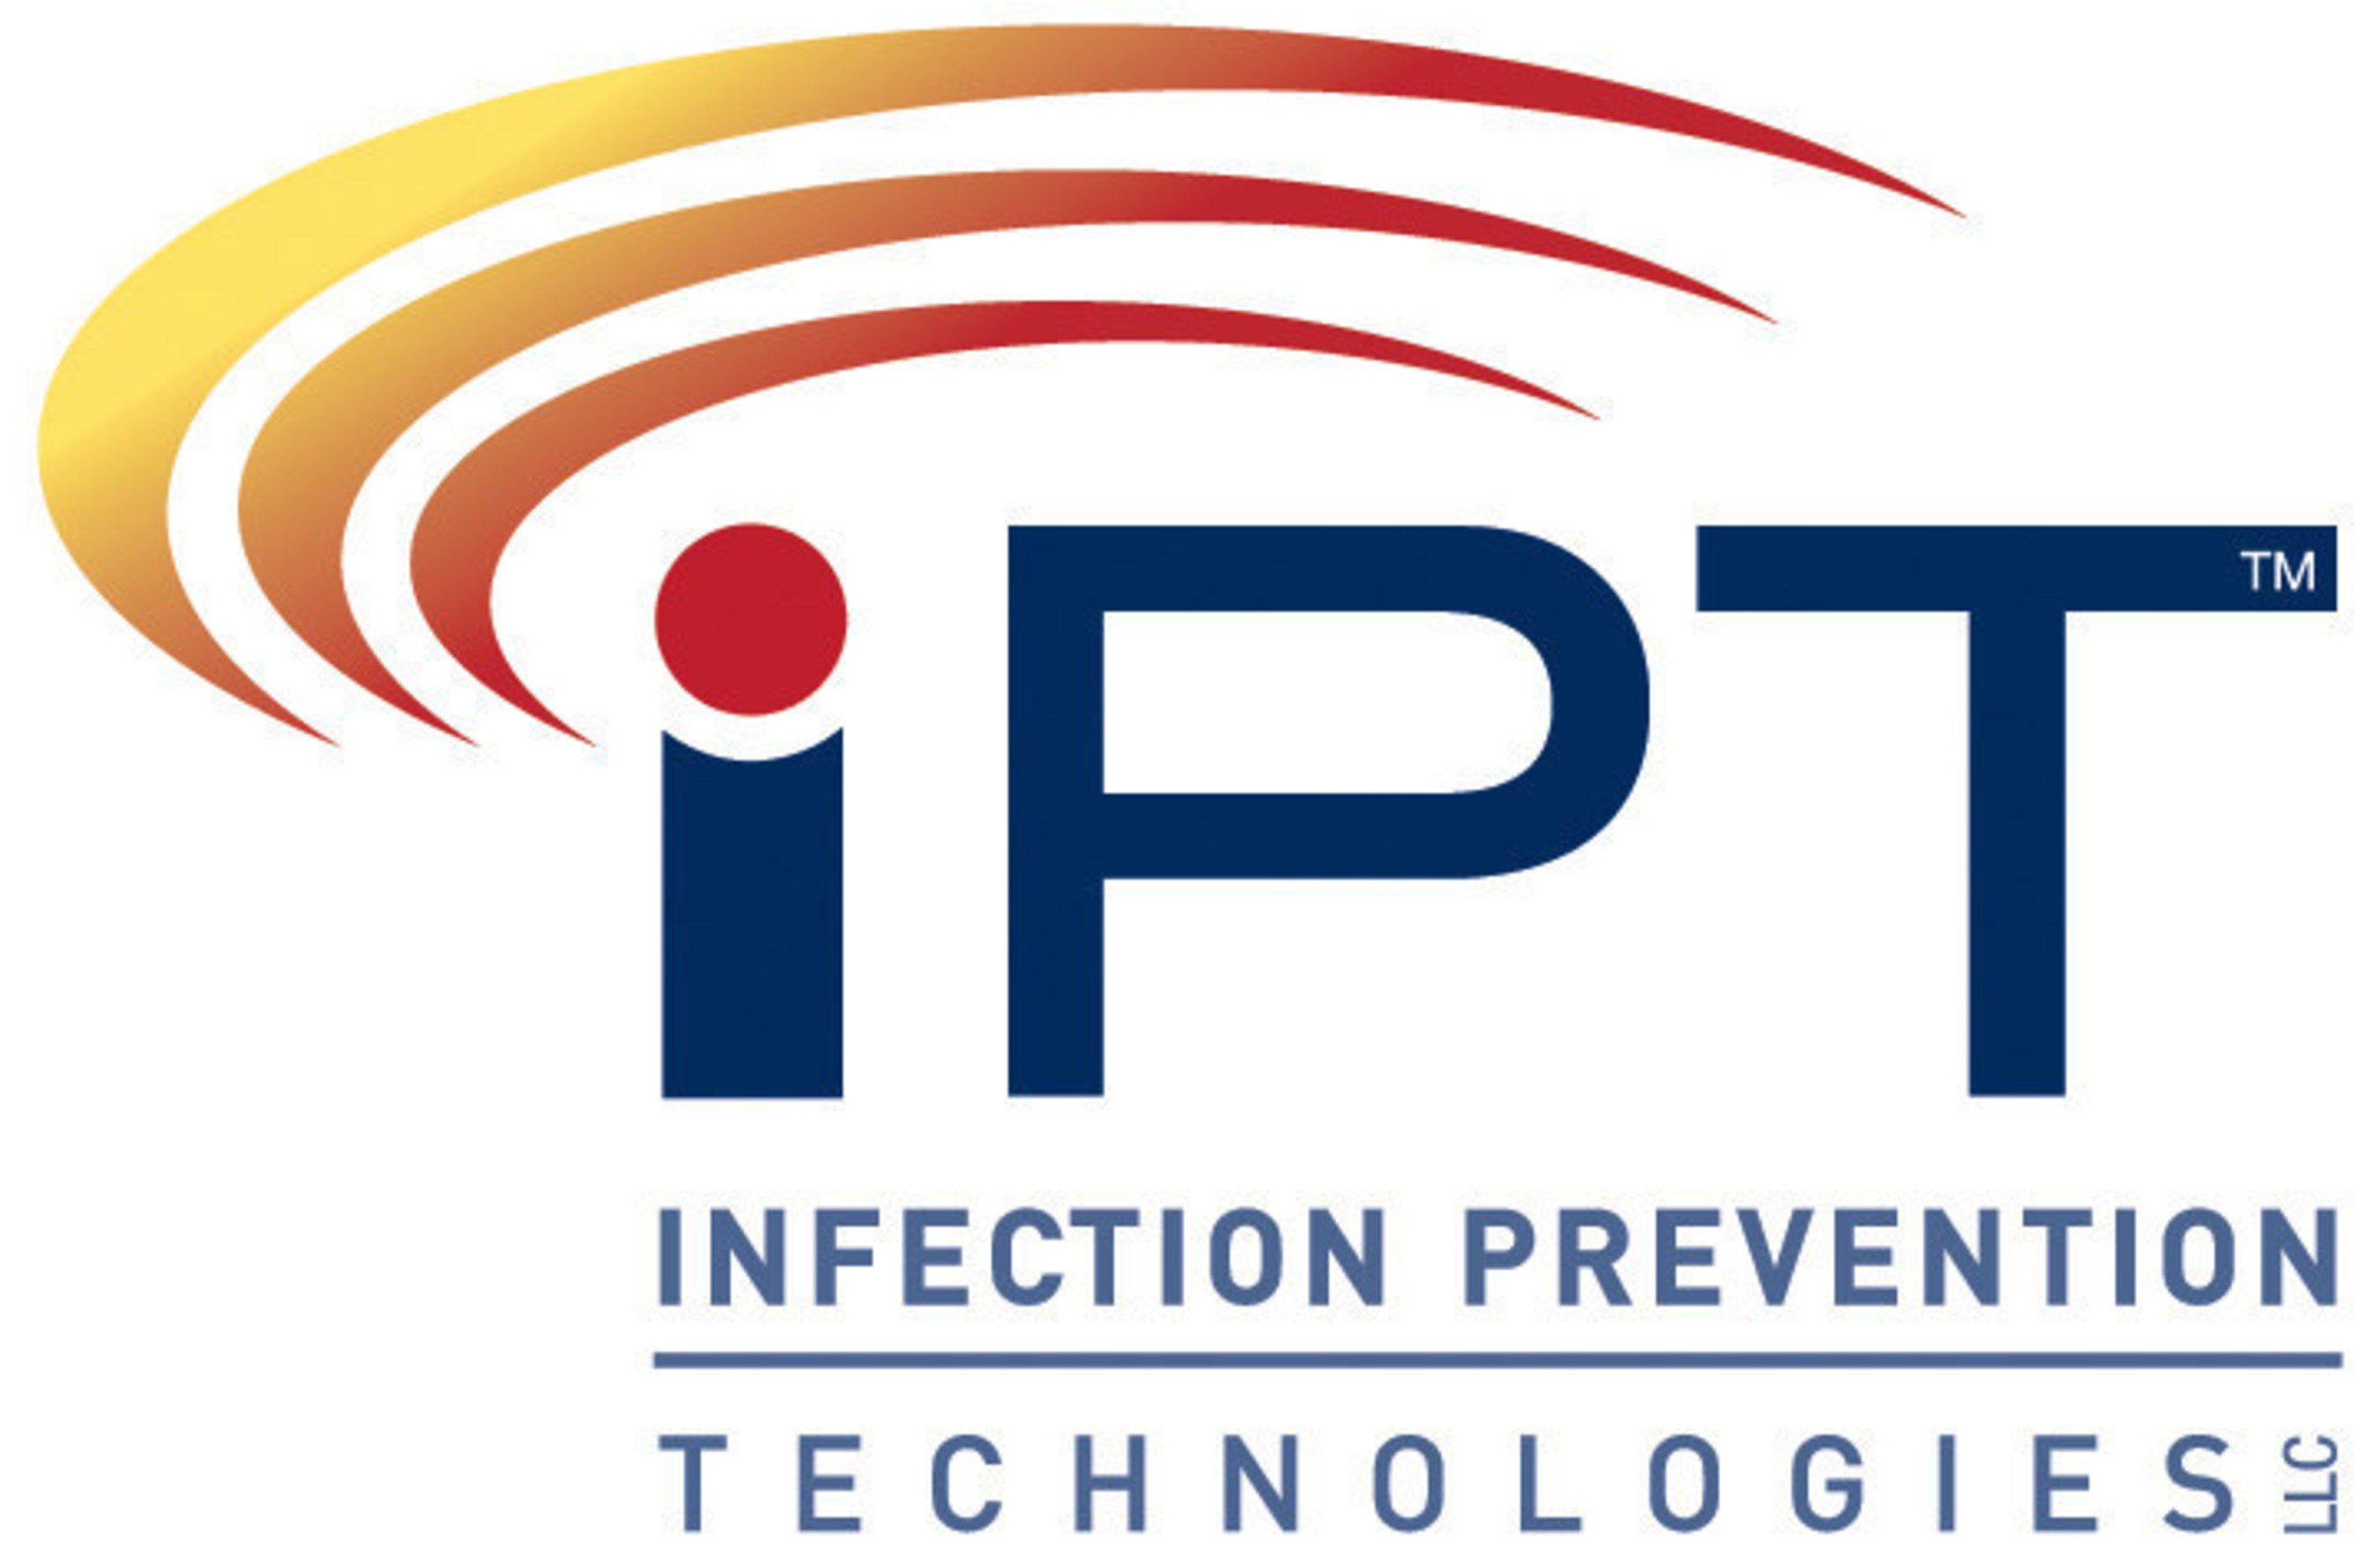 Infection Prevention Technologies,www.infectionpreventiontechnologies.com